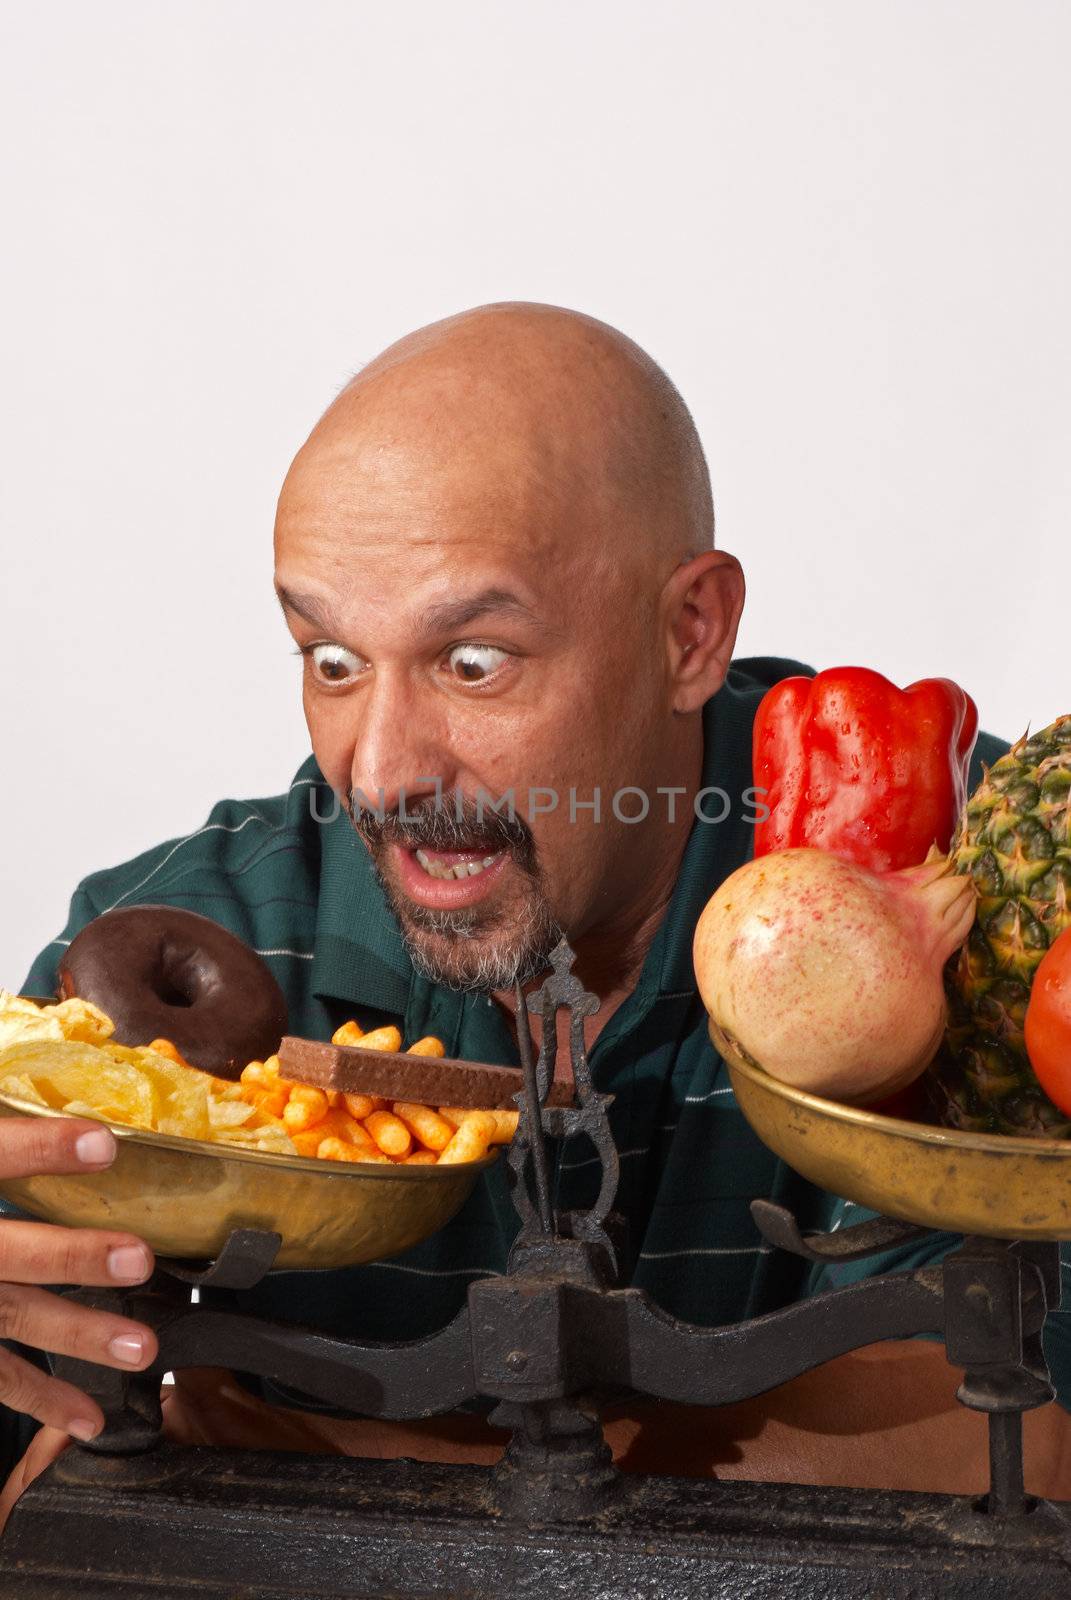 Guy about to fail in his effort to keep up a diet